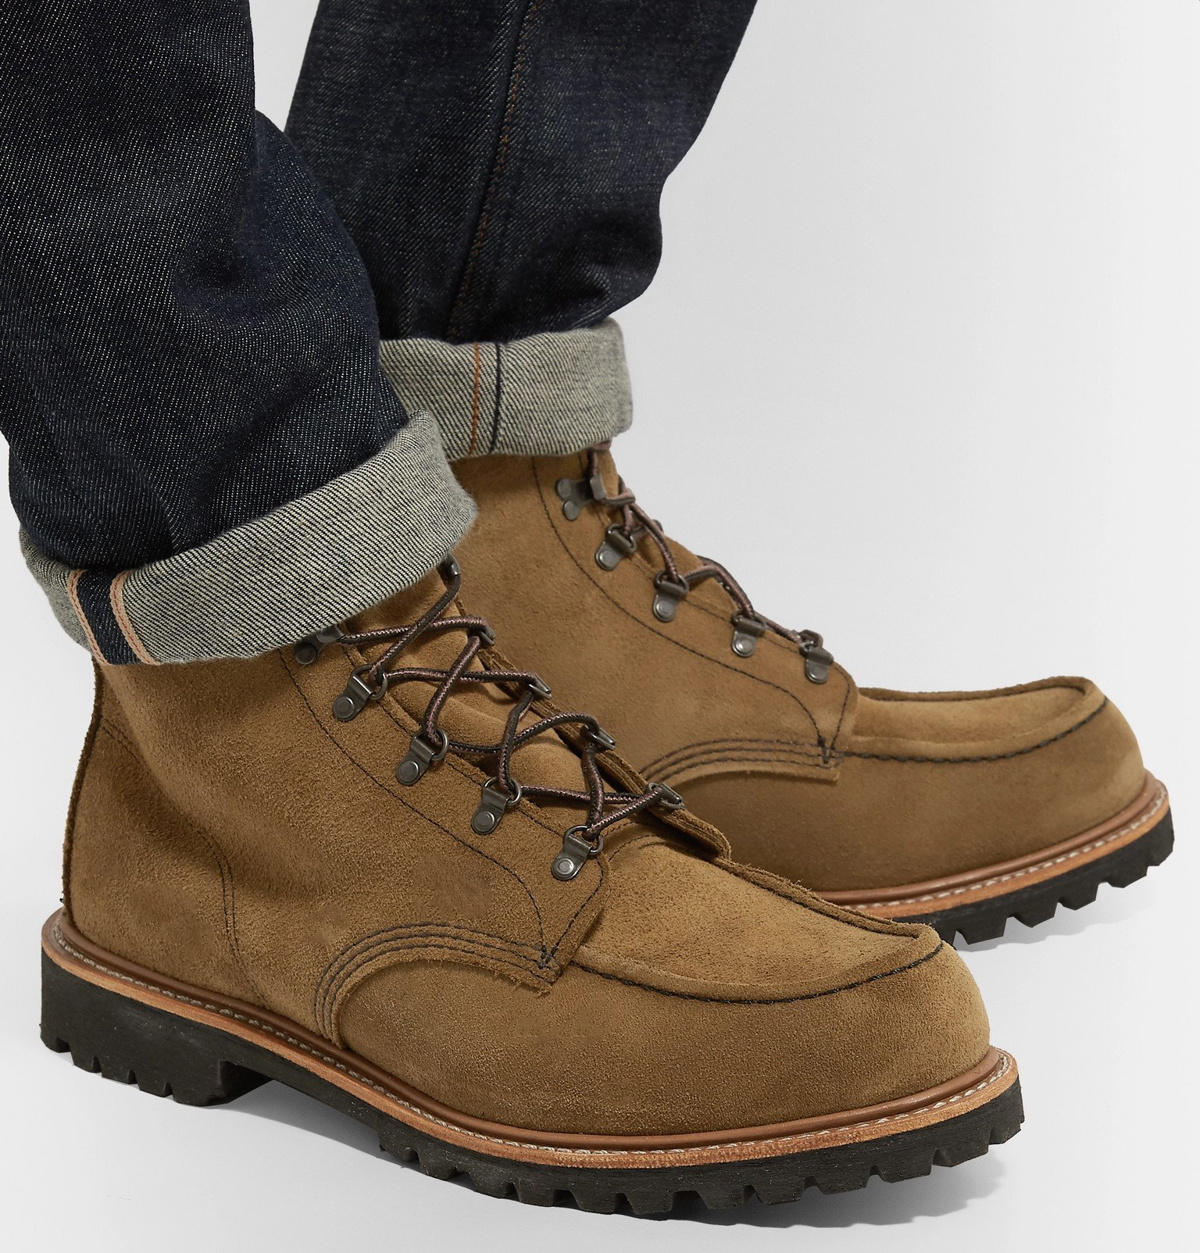 Red Wing Shoes - 2926 Sawmill Roughout Leather Boots Brown Red Wing Shoes